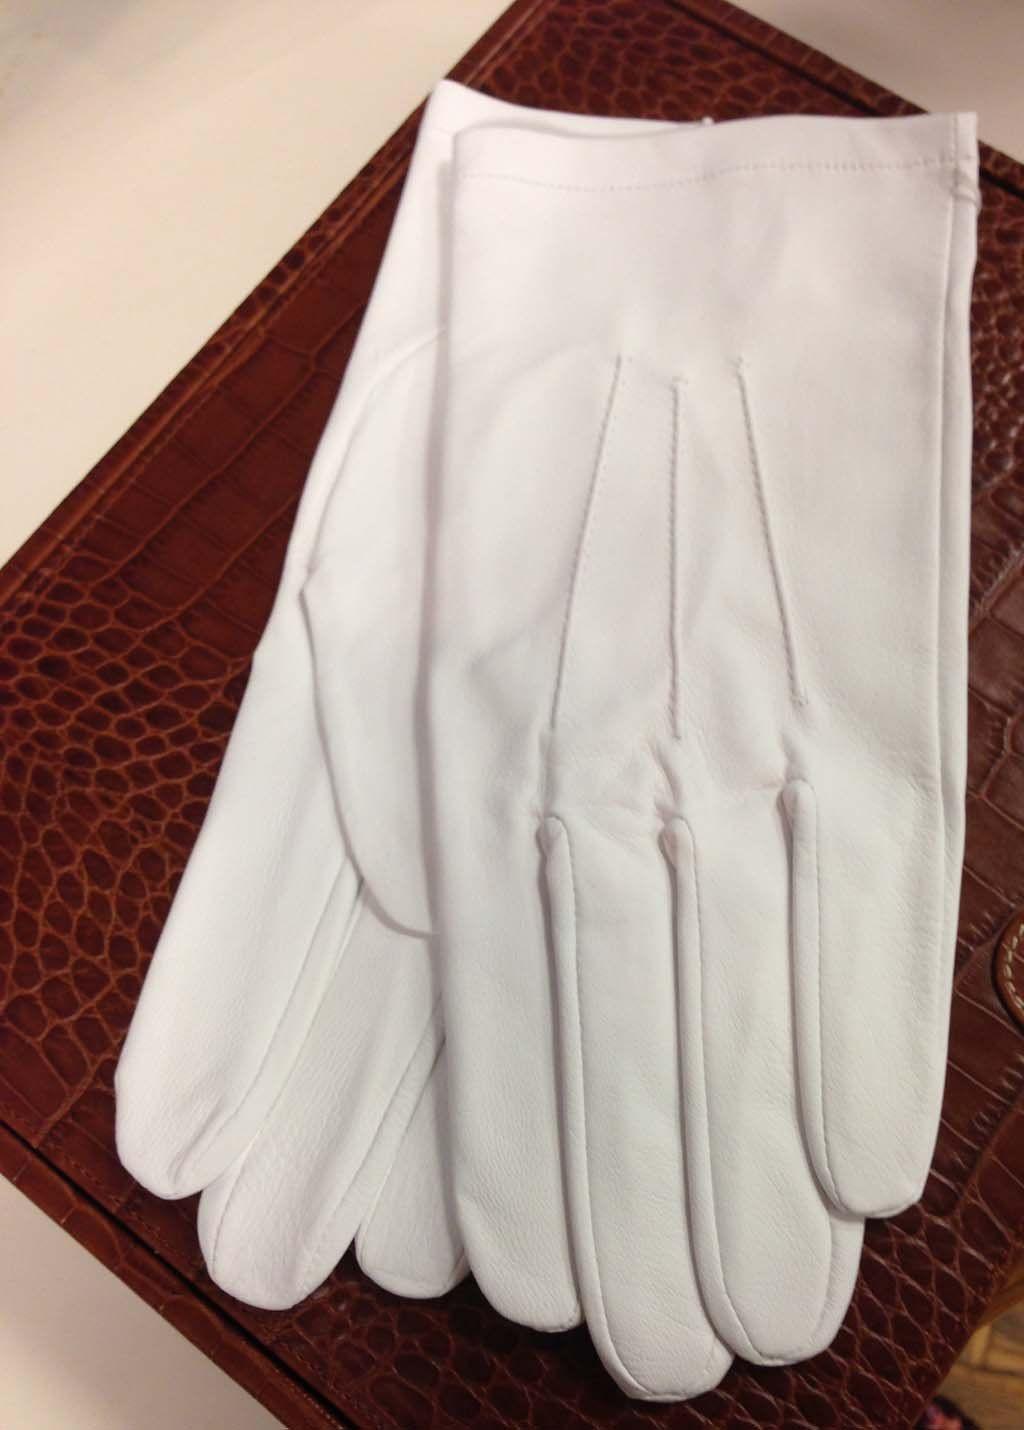 A Guide For Purchasing Gloves, White Kid Leather Gloves